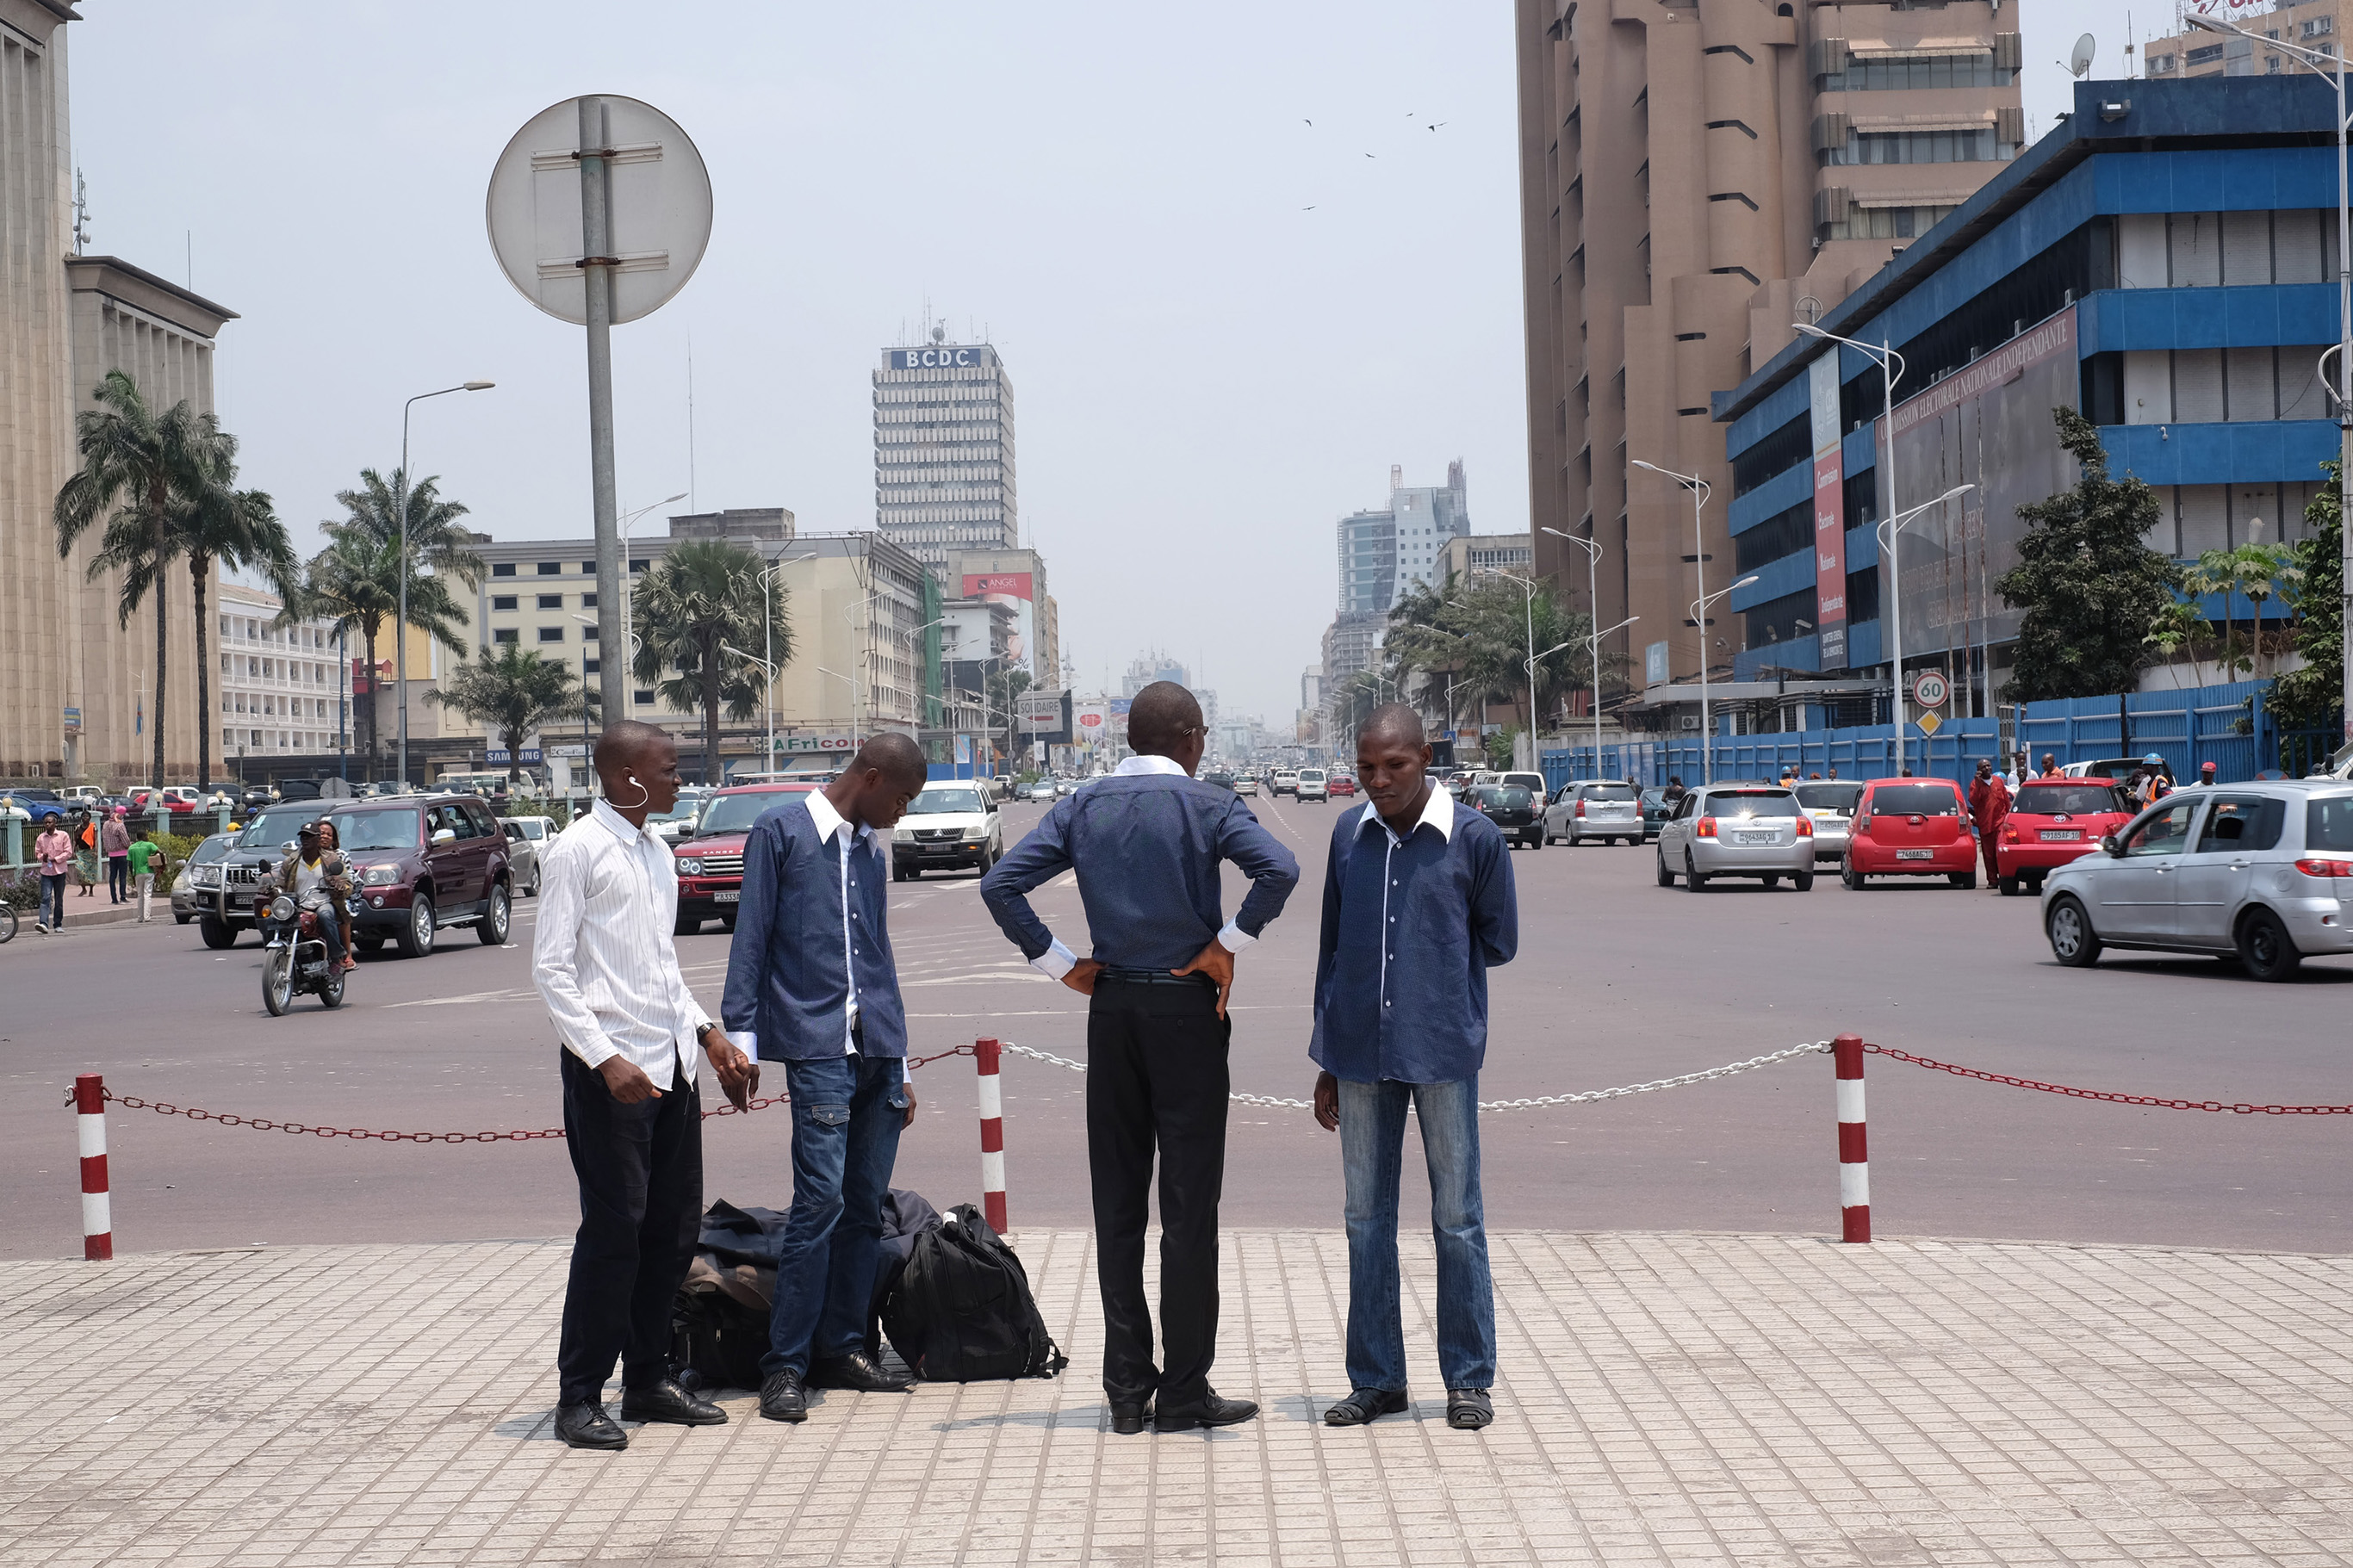 Four men stand by the main road in Kinshasa, DRC